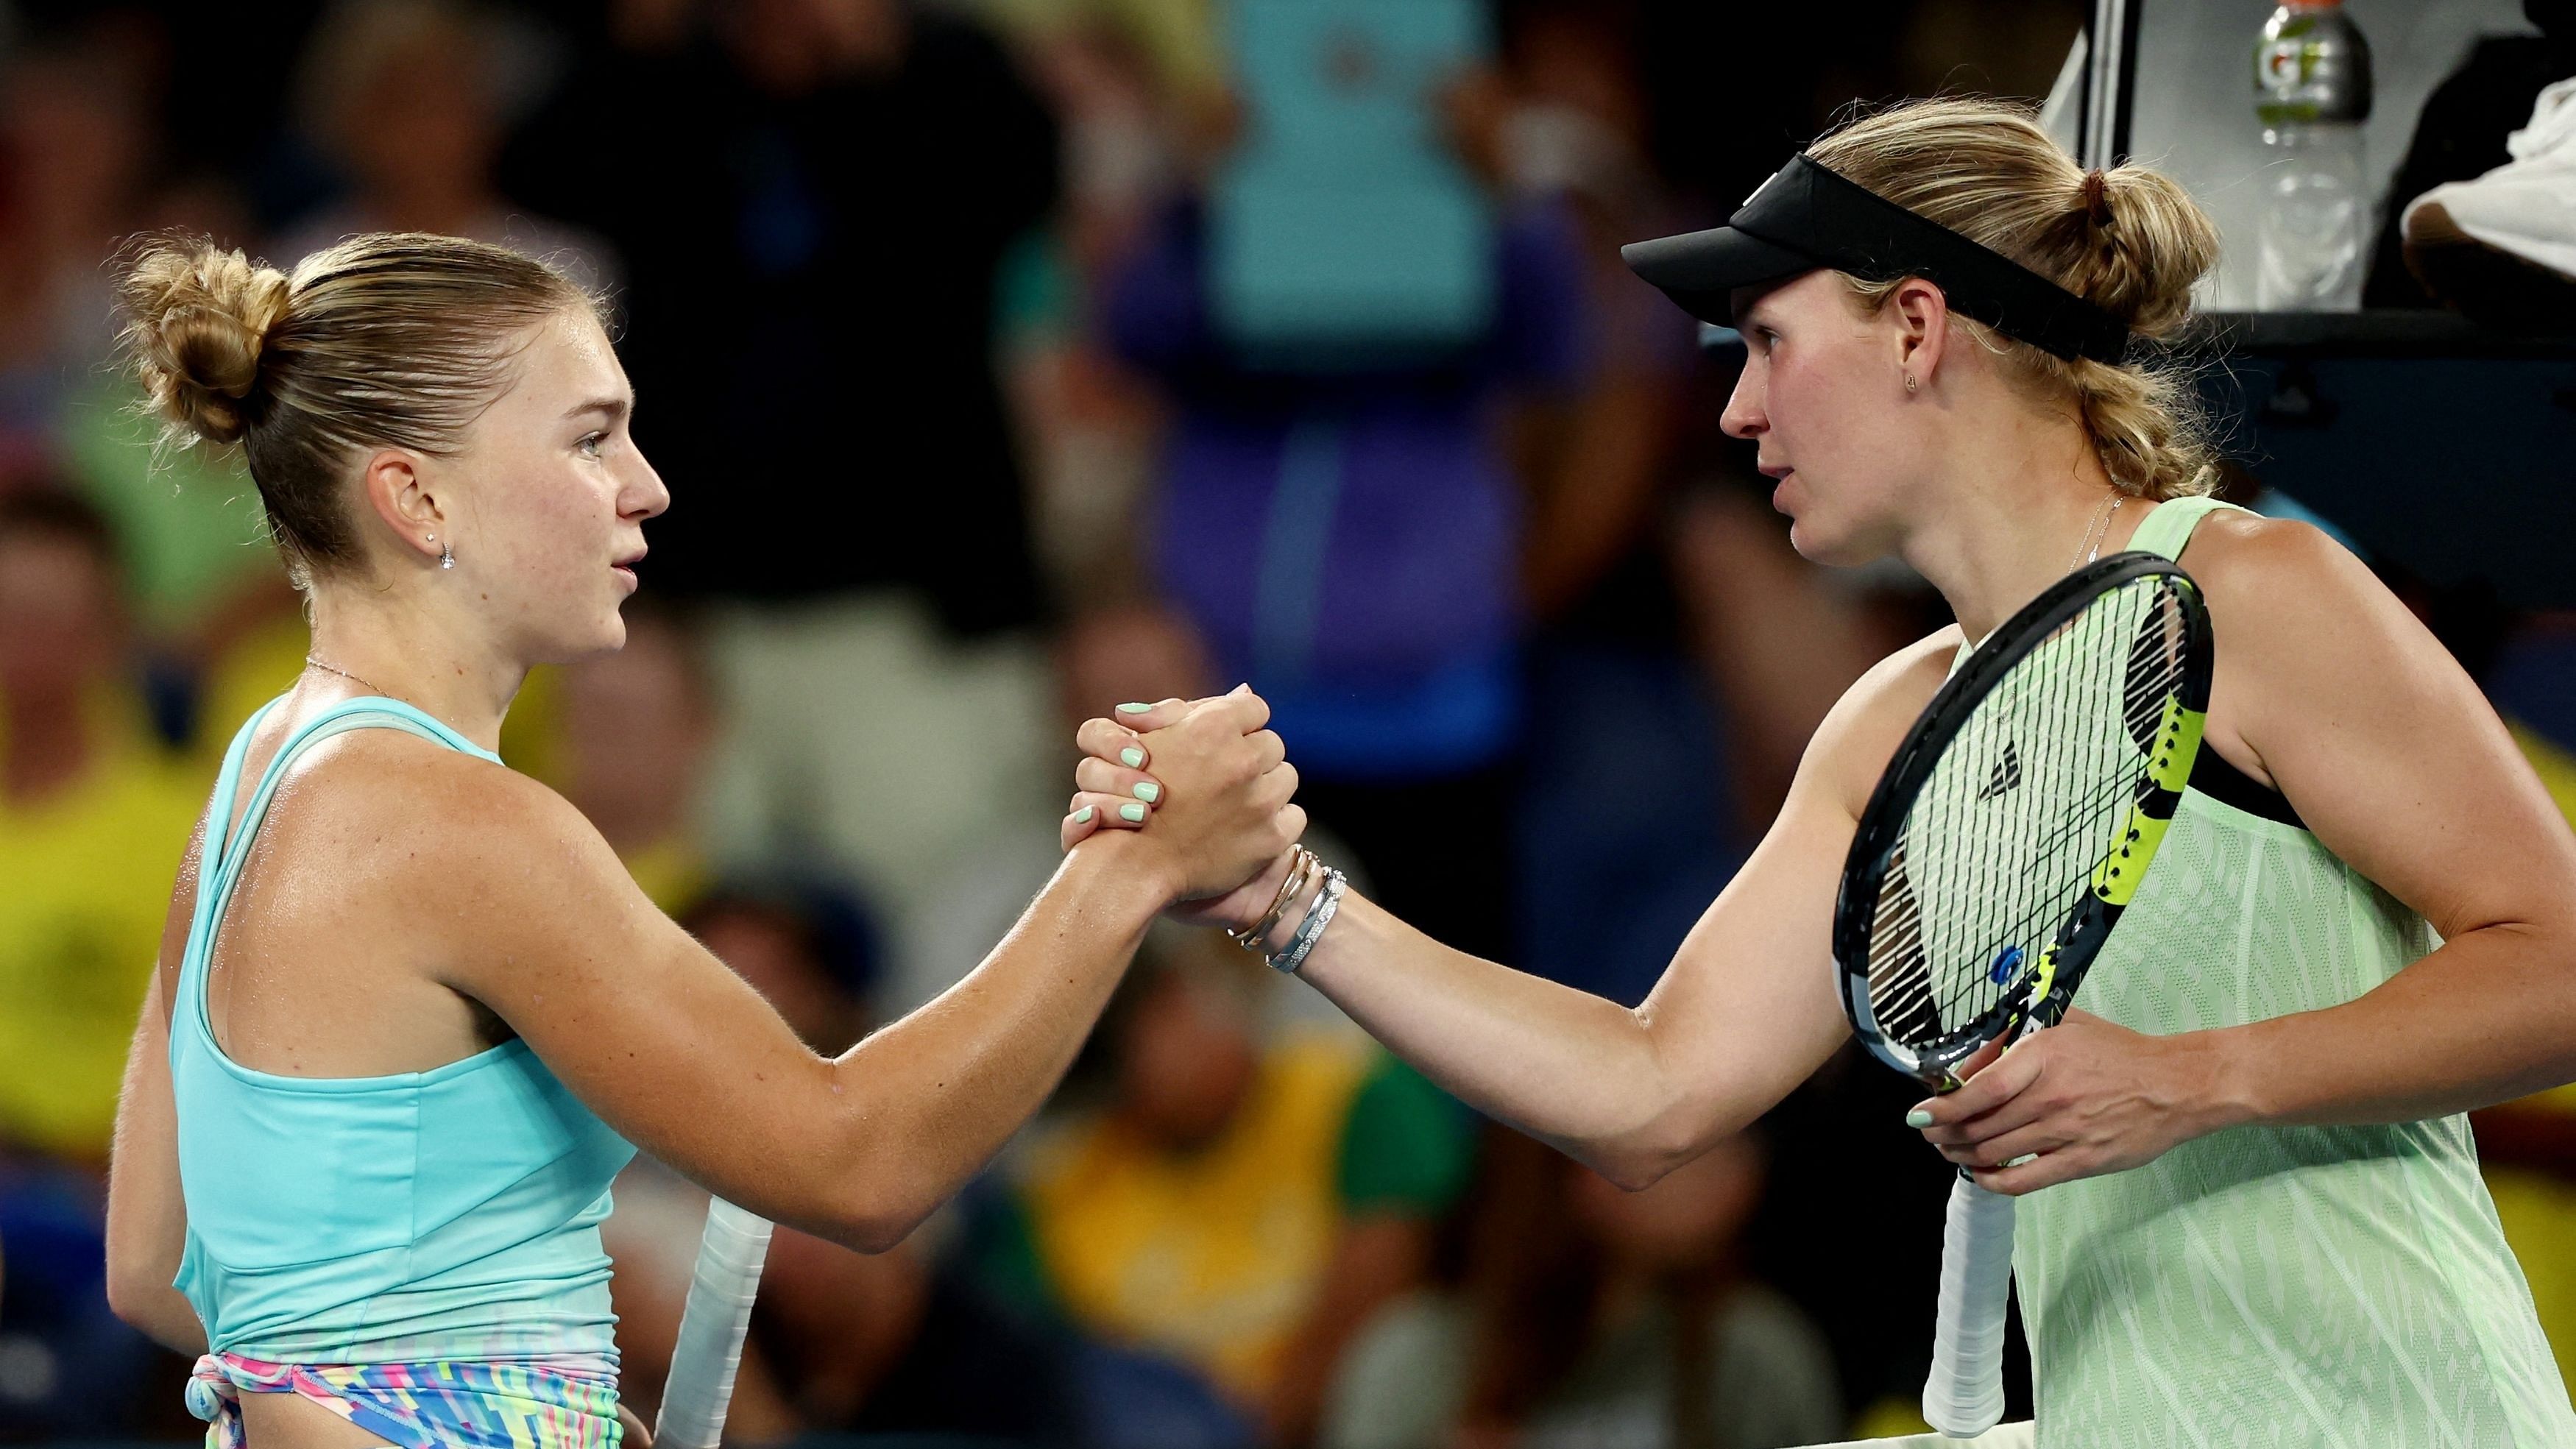 <div class="paragraphs"><p>(L) Russia's Maria Timofeeva shakes hands with (R) Denmark's Caroline Wozniacki after winning her second round match on January 17, 2024.</p></div>